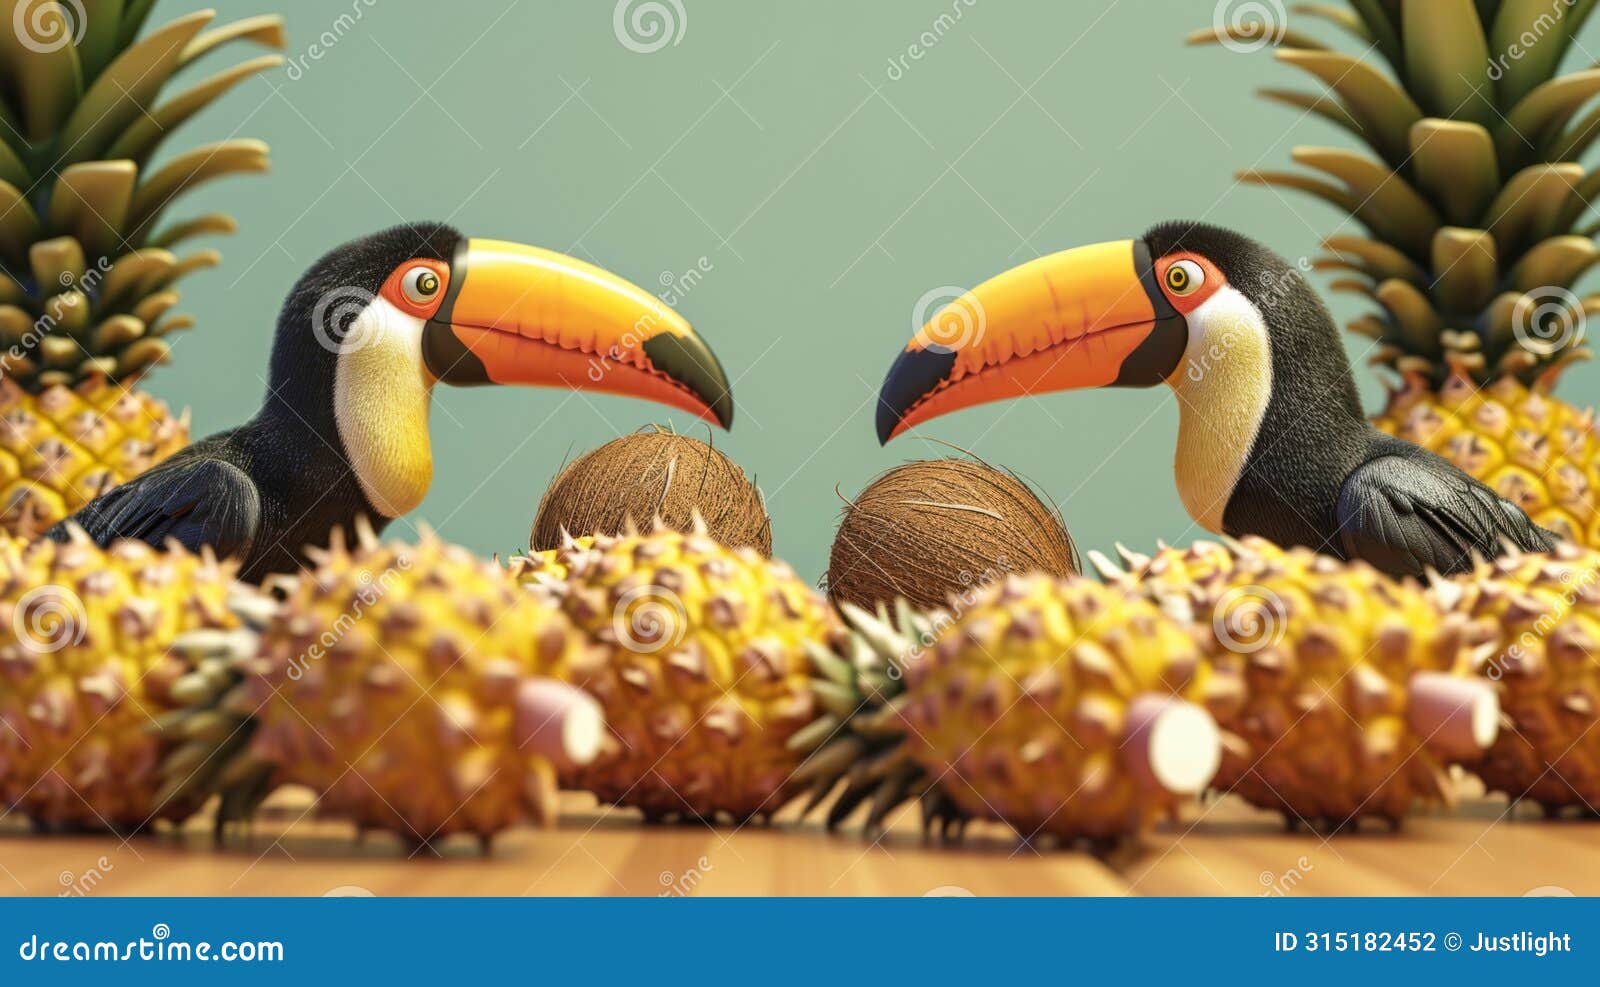 two toucans using their long beaks to roll coconuts down the bowling lane narrowly avoiding knocking over a pile of